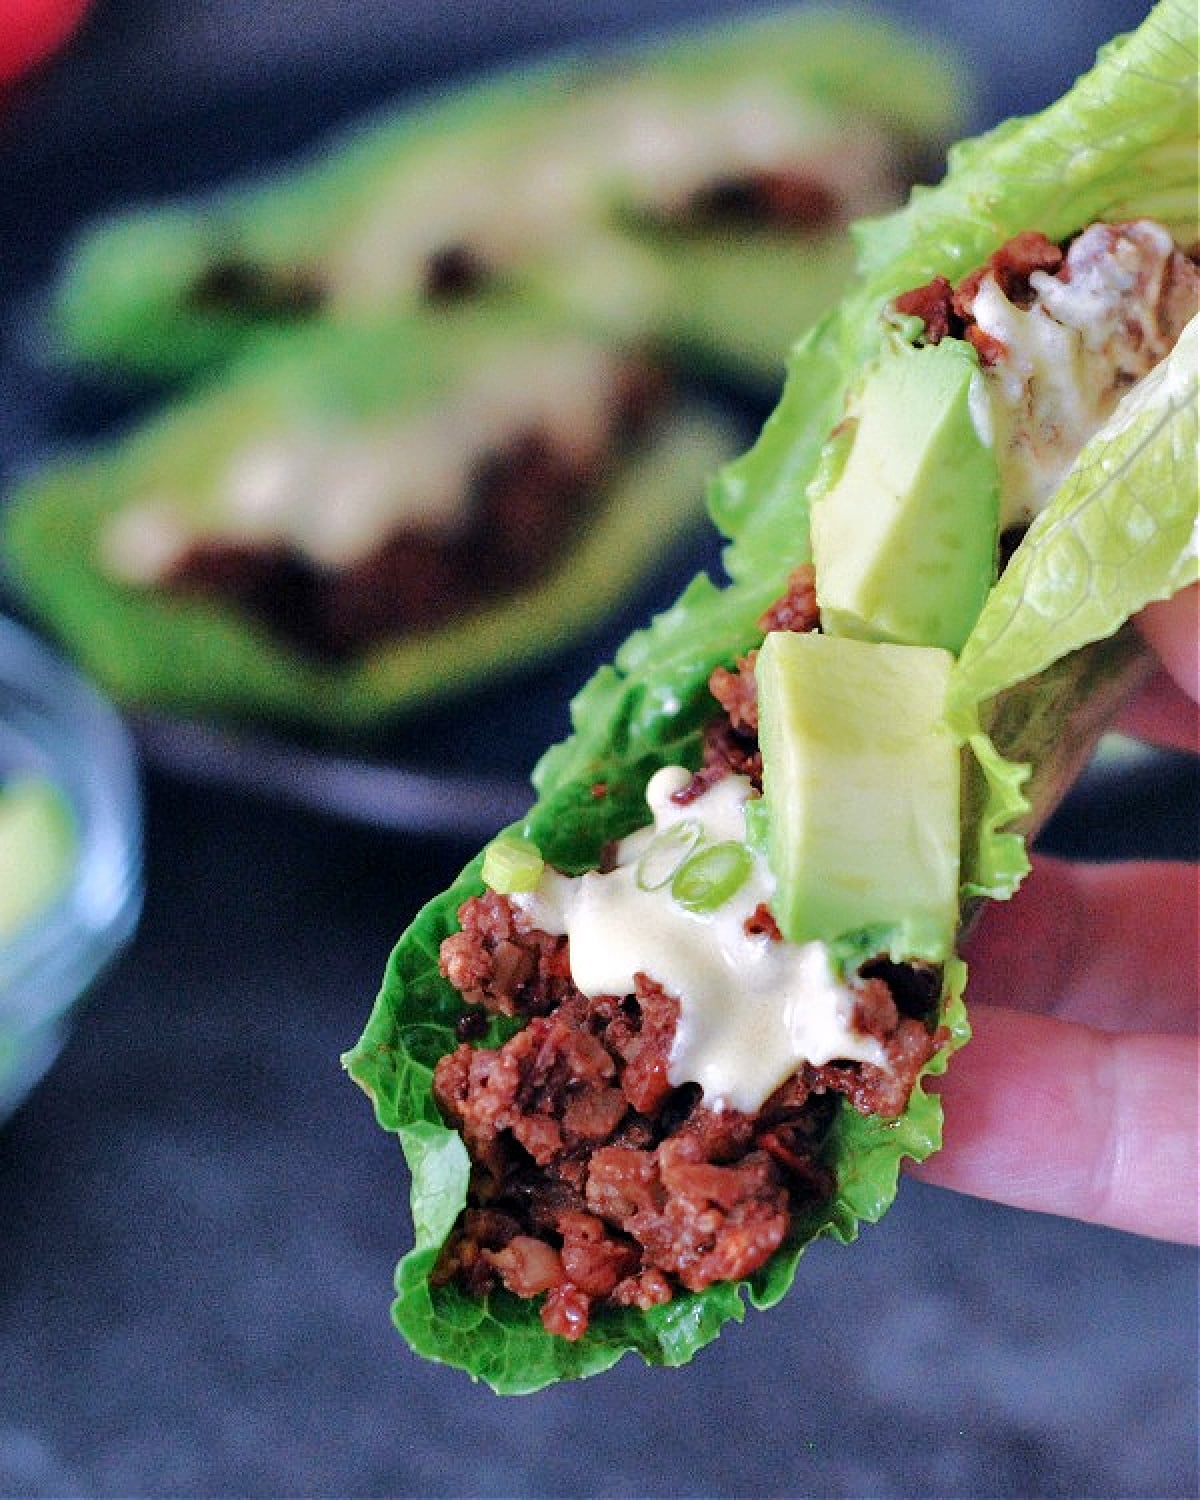 A hand holding a vegan chorizo sausage in lettuce wrap with avocado slices and dairy free cheese sauce.